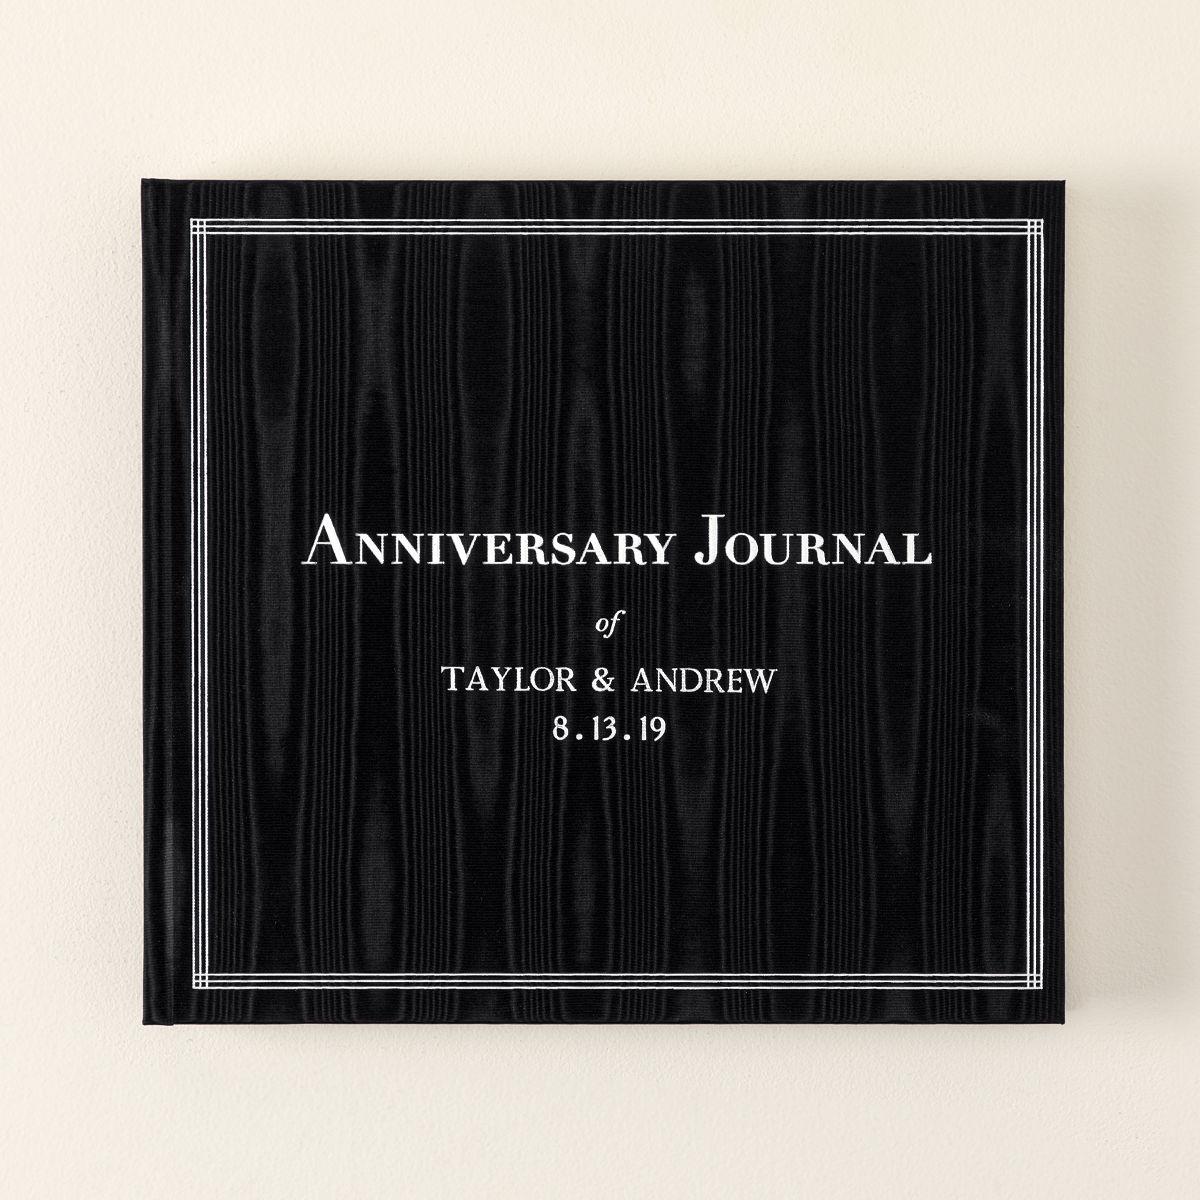 Personalized anniversary journal gift for couple on first anniversary